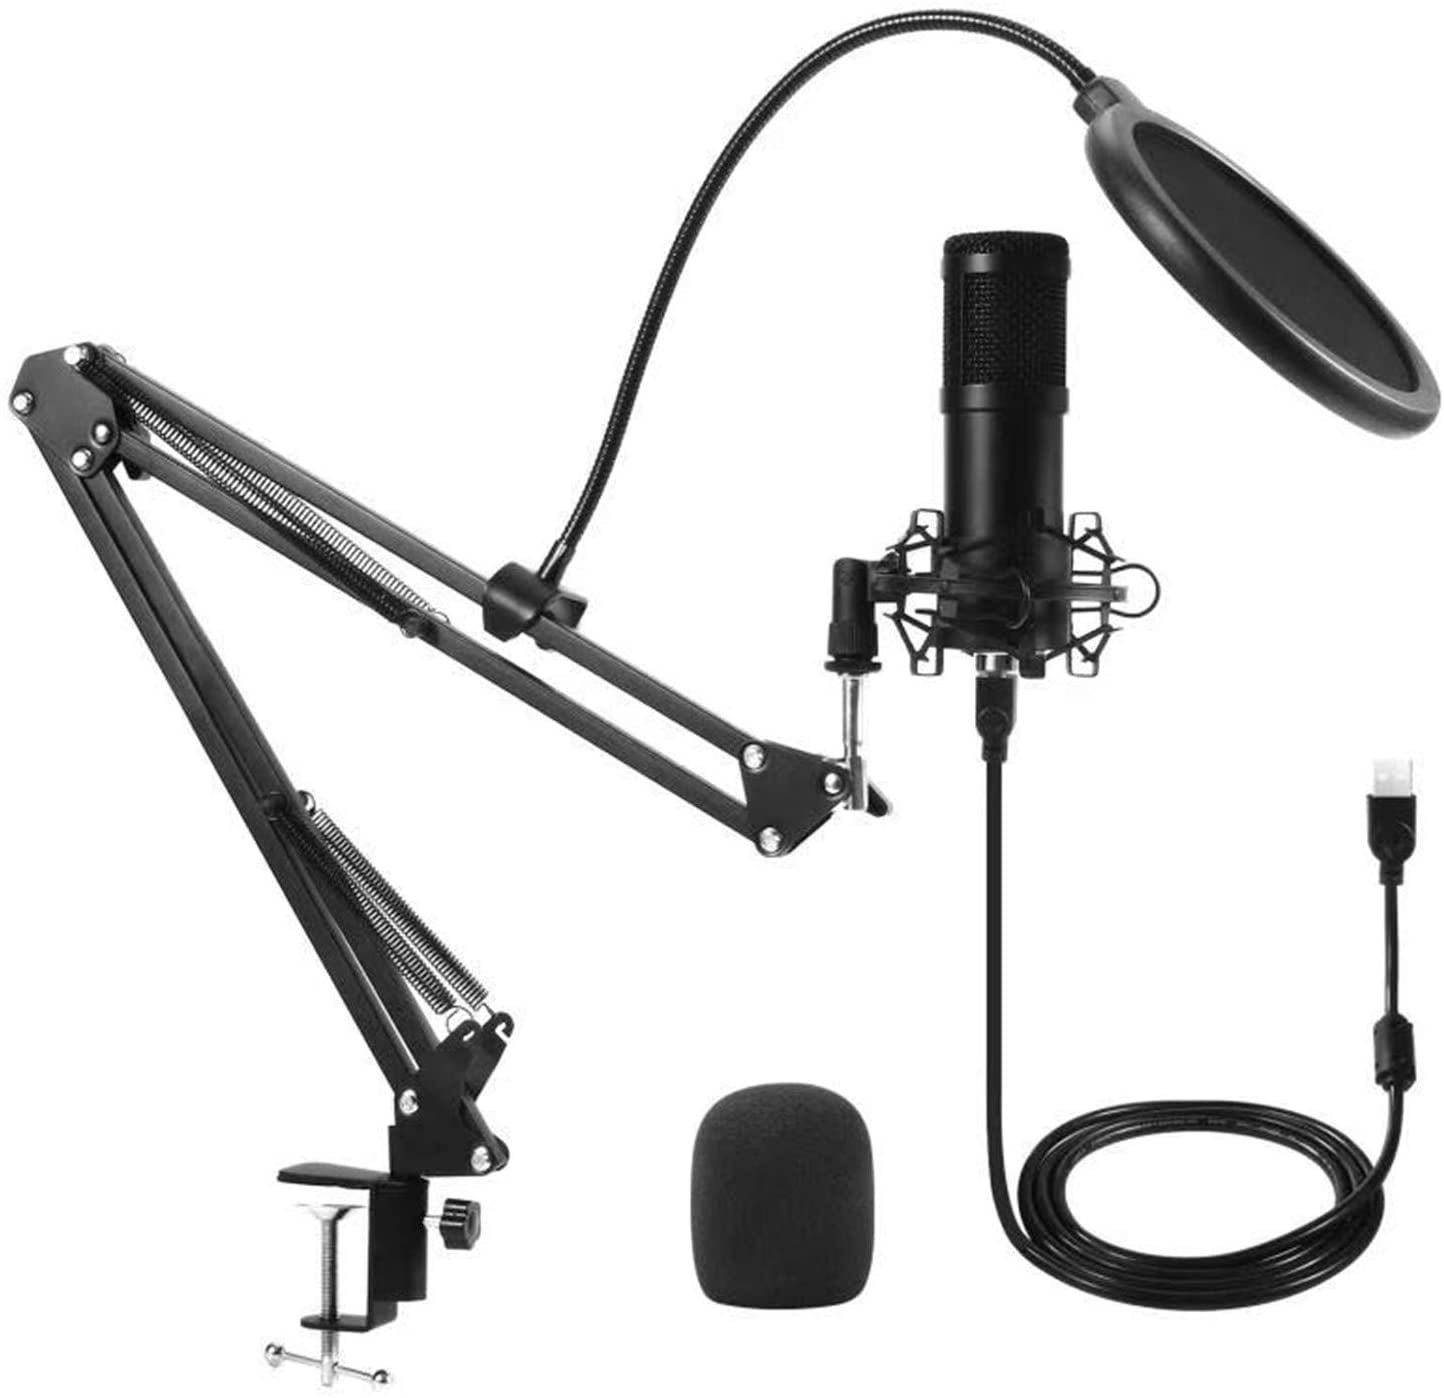 Black USB Gaming Microphone Set with Flexible Arm Filter Live Streaming Studio for PC 